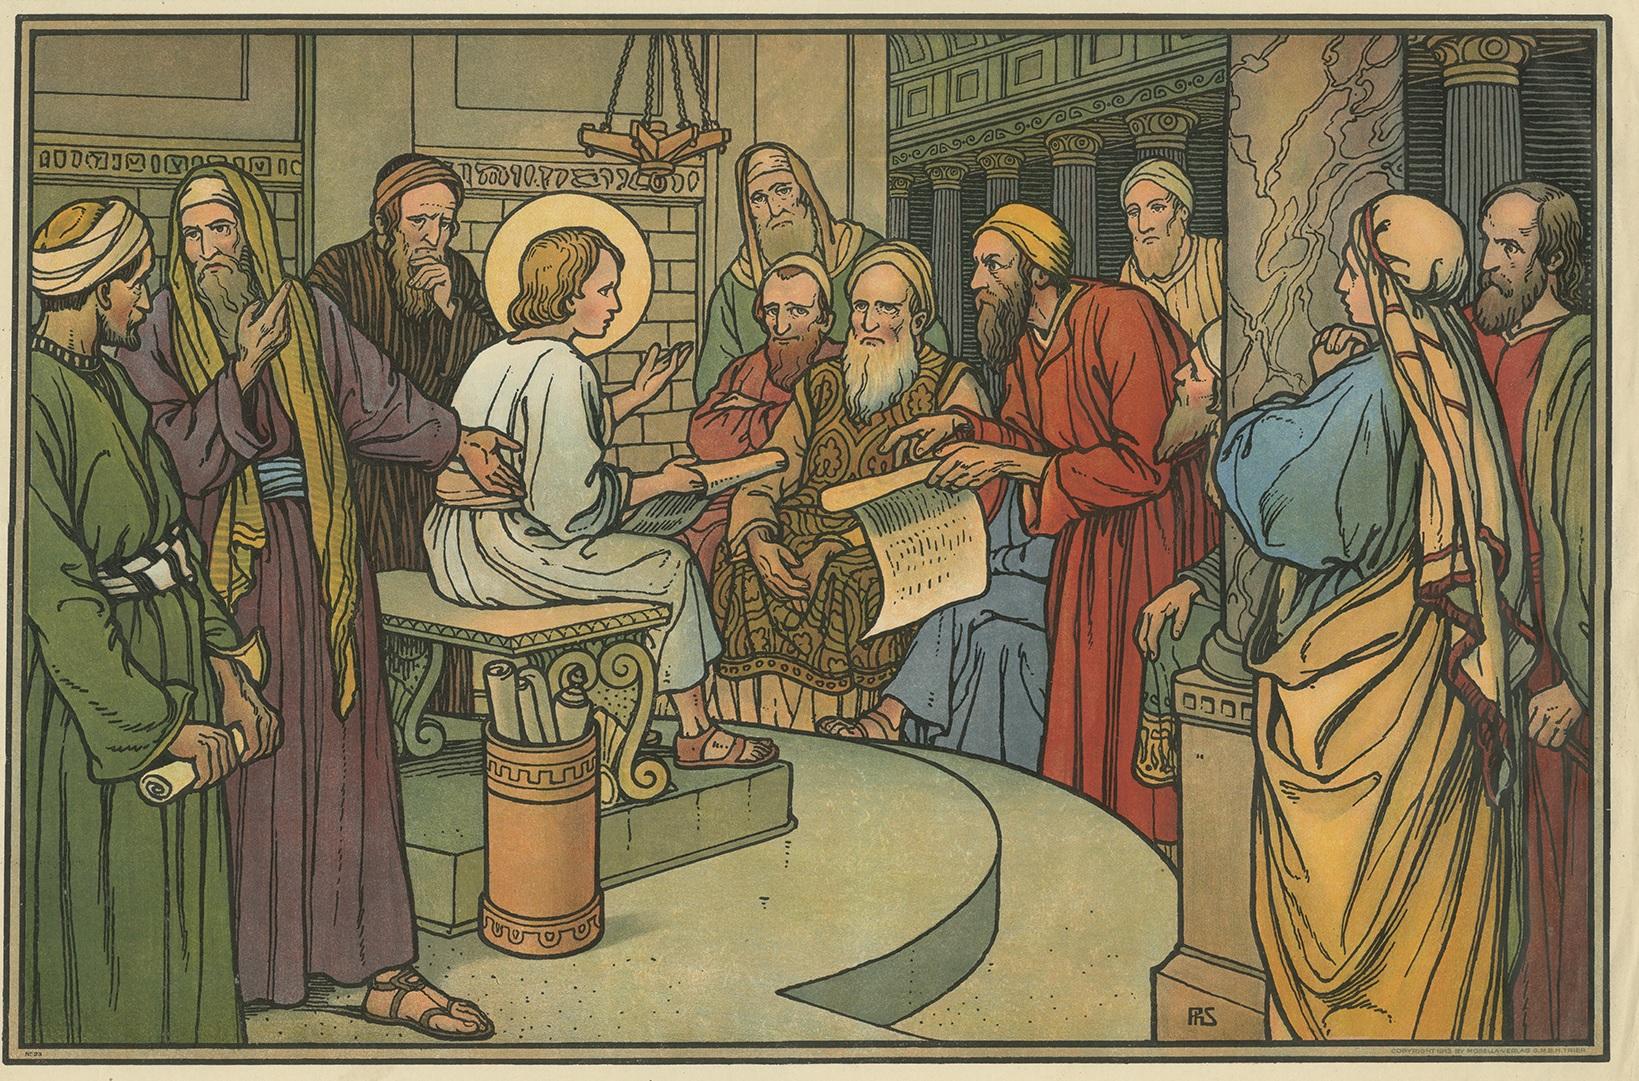 Large antique print of Christ among the Scribes. Published by Mosella-Verlag, 1913. This print originates from a series titled 'Kathol. Schulbibelwerk von Dr. Ecker'. 